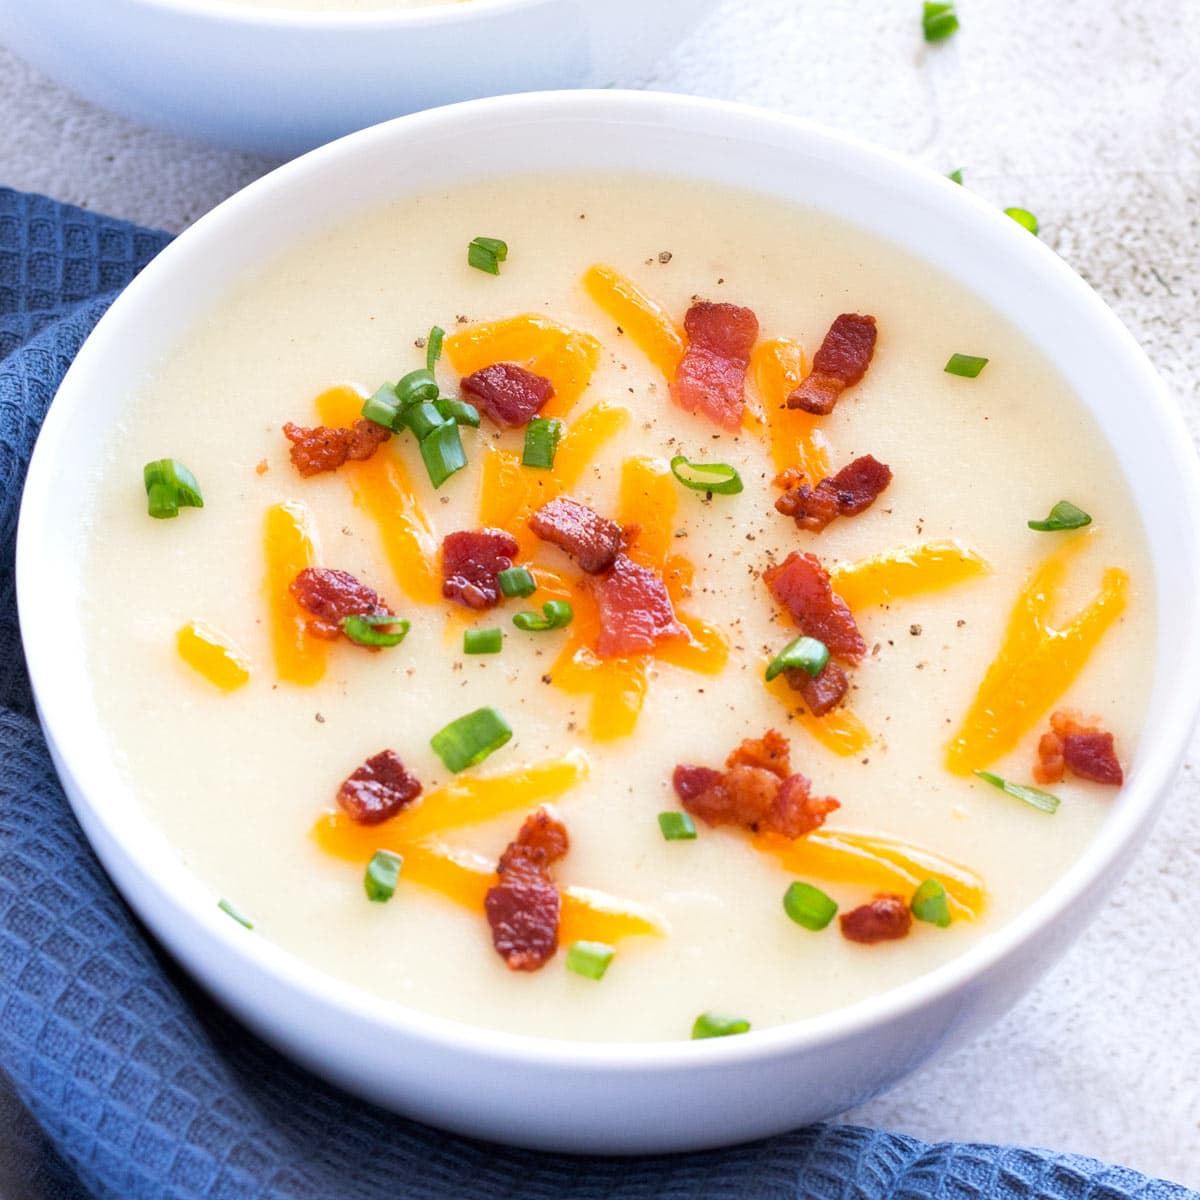 https://borrowedbites.com/wp-content/uploads/2021/09/Bowl-Of-Potato-Soup-With-Toppings.jpg